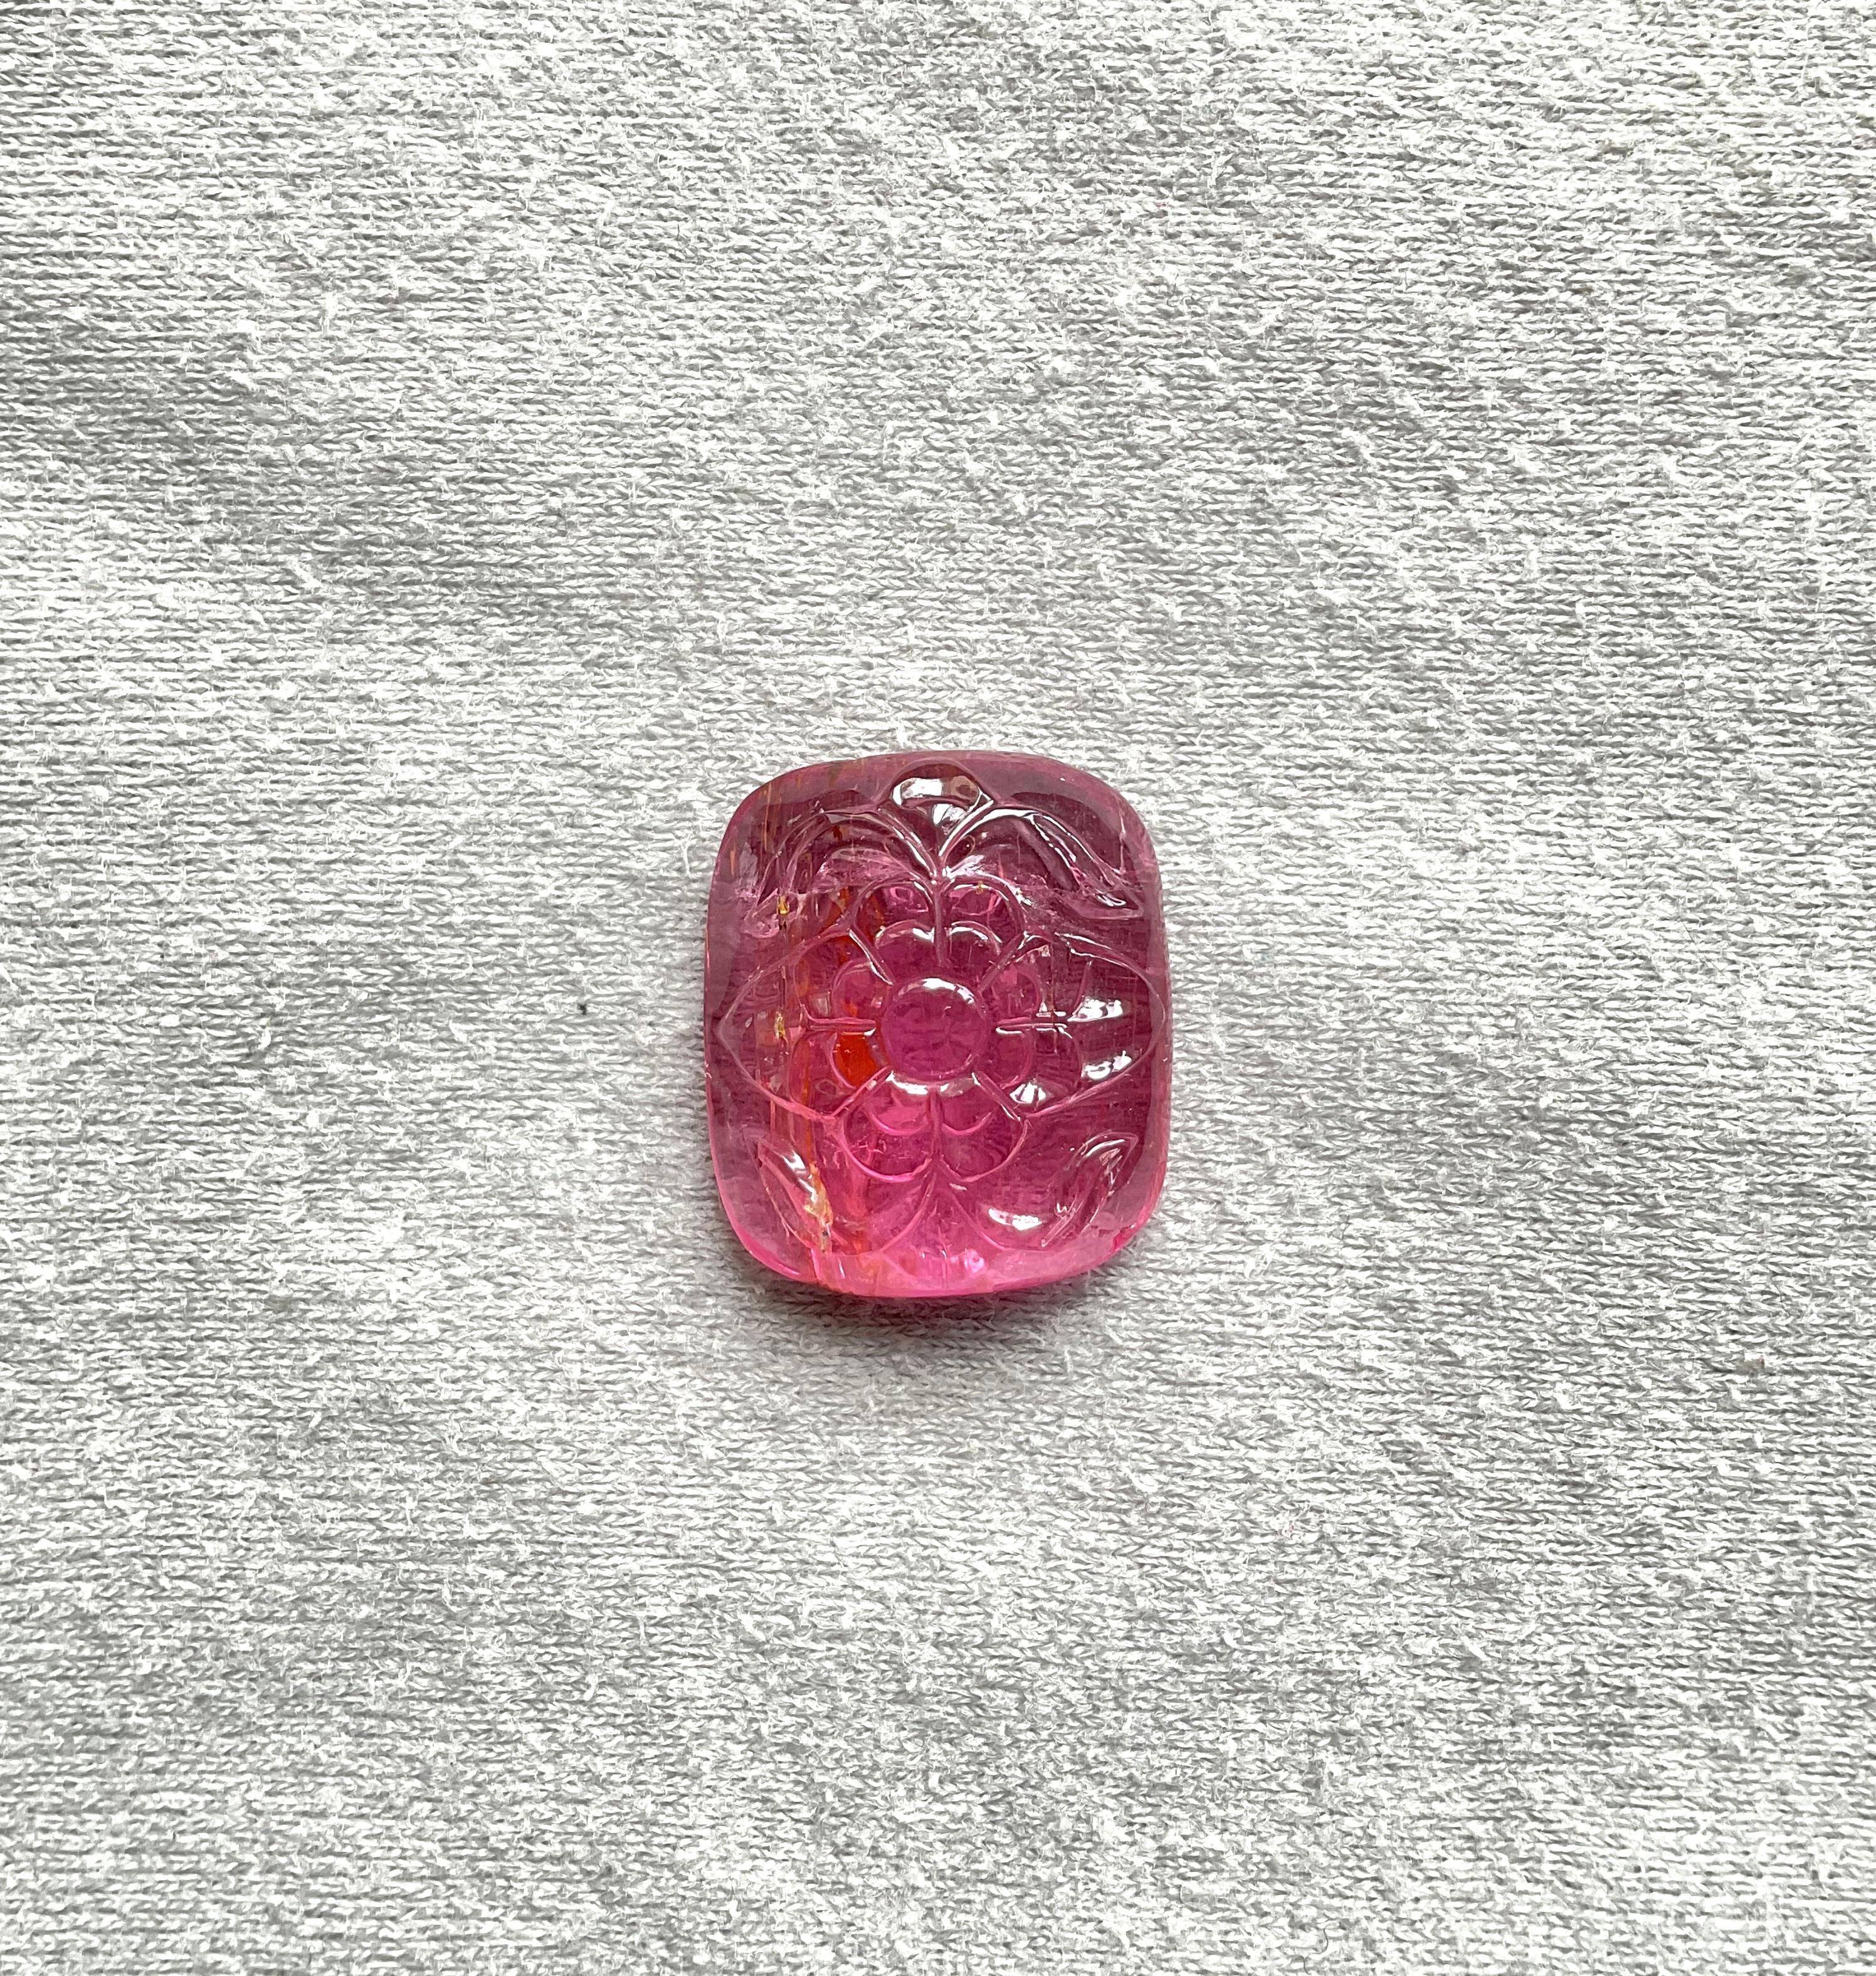 This is a one of a kind of rubellite tourmaline.
Gemstone - Rubellite Tourmaline
Weight -  26.76 Ct
Size - 21x18 MM
Piece - 1

